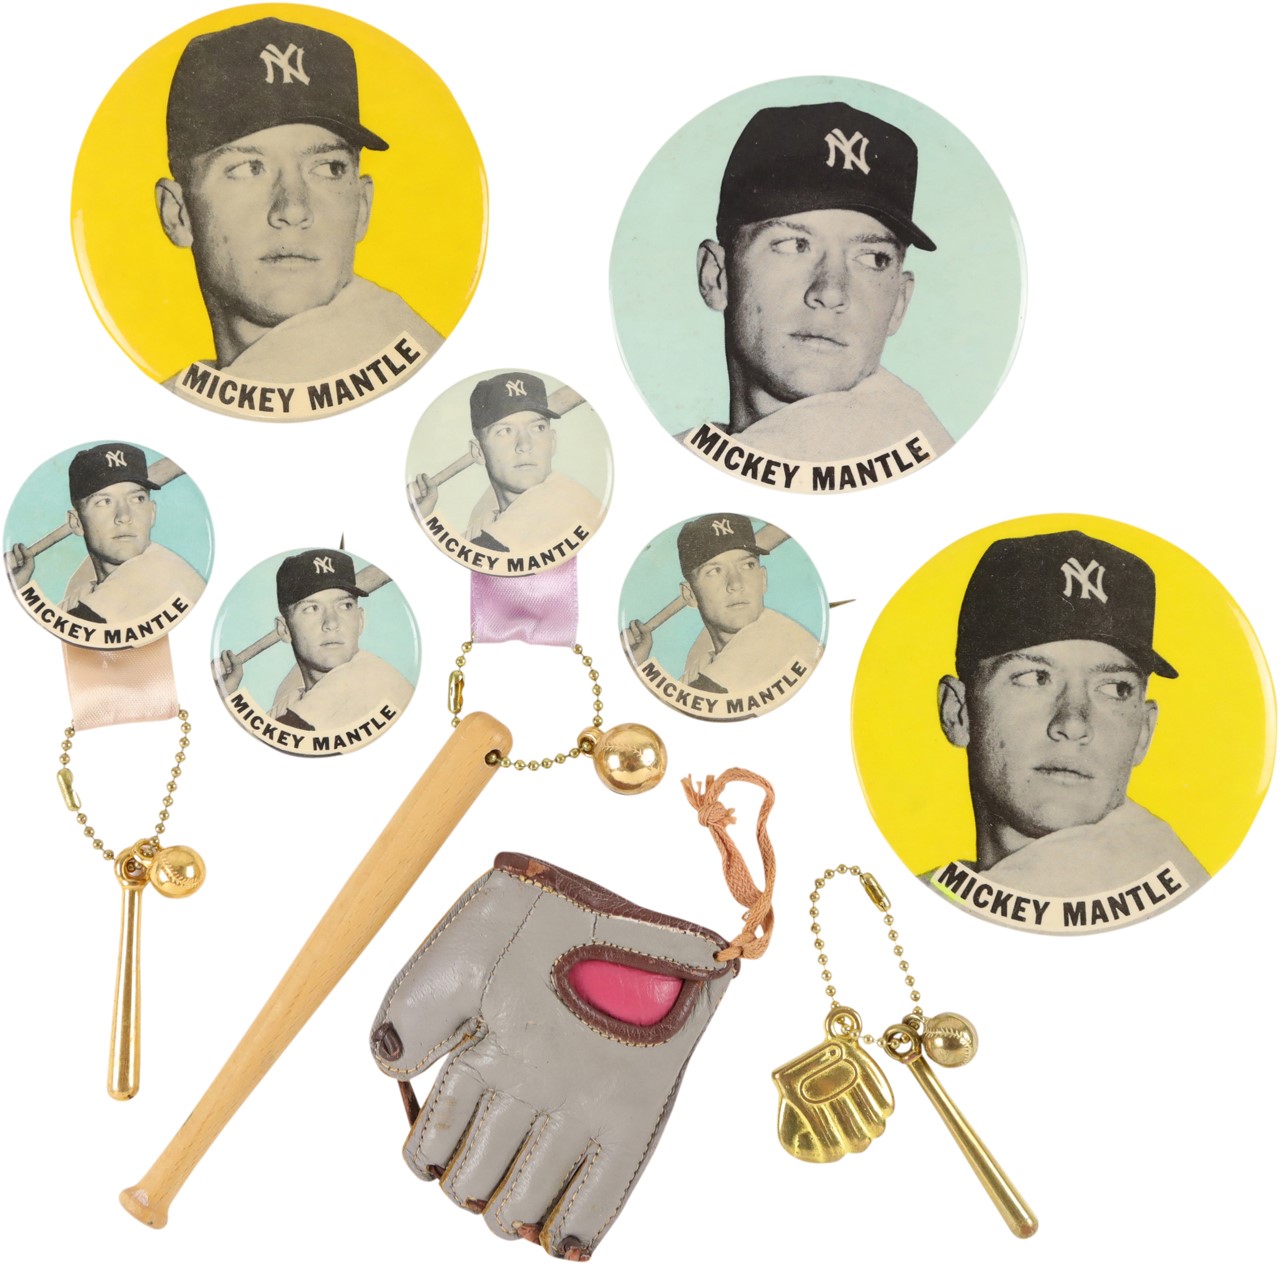 Mantle and Maris - 1960s Mickey Mantle Pinback and Button Collection with Two Large Yellow Variations (7)